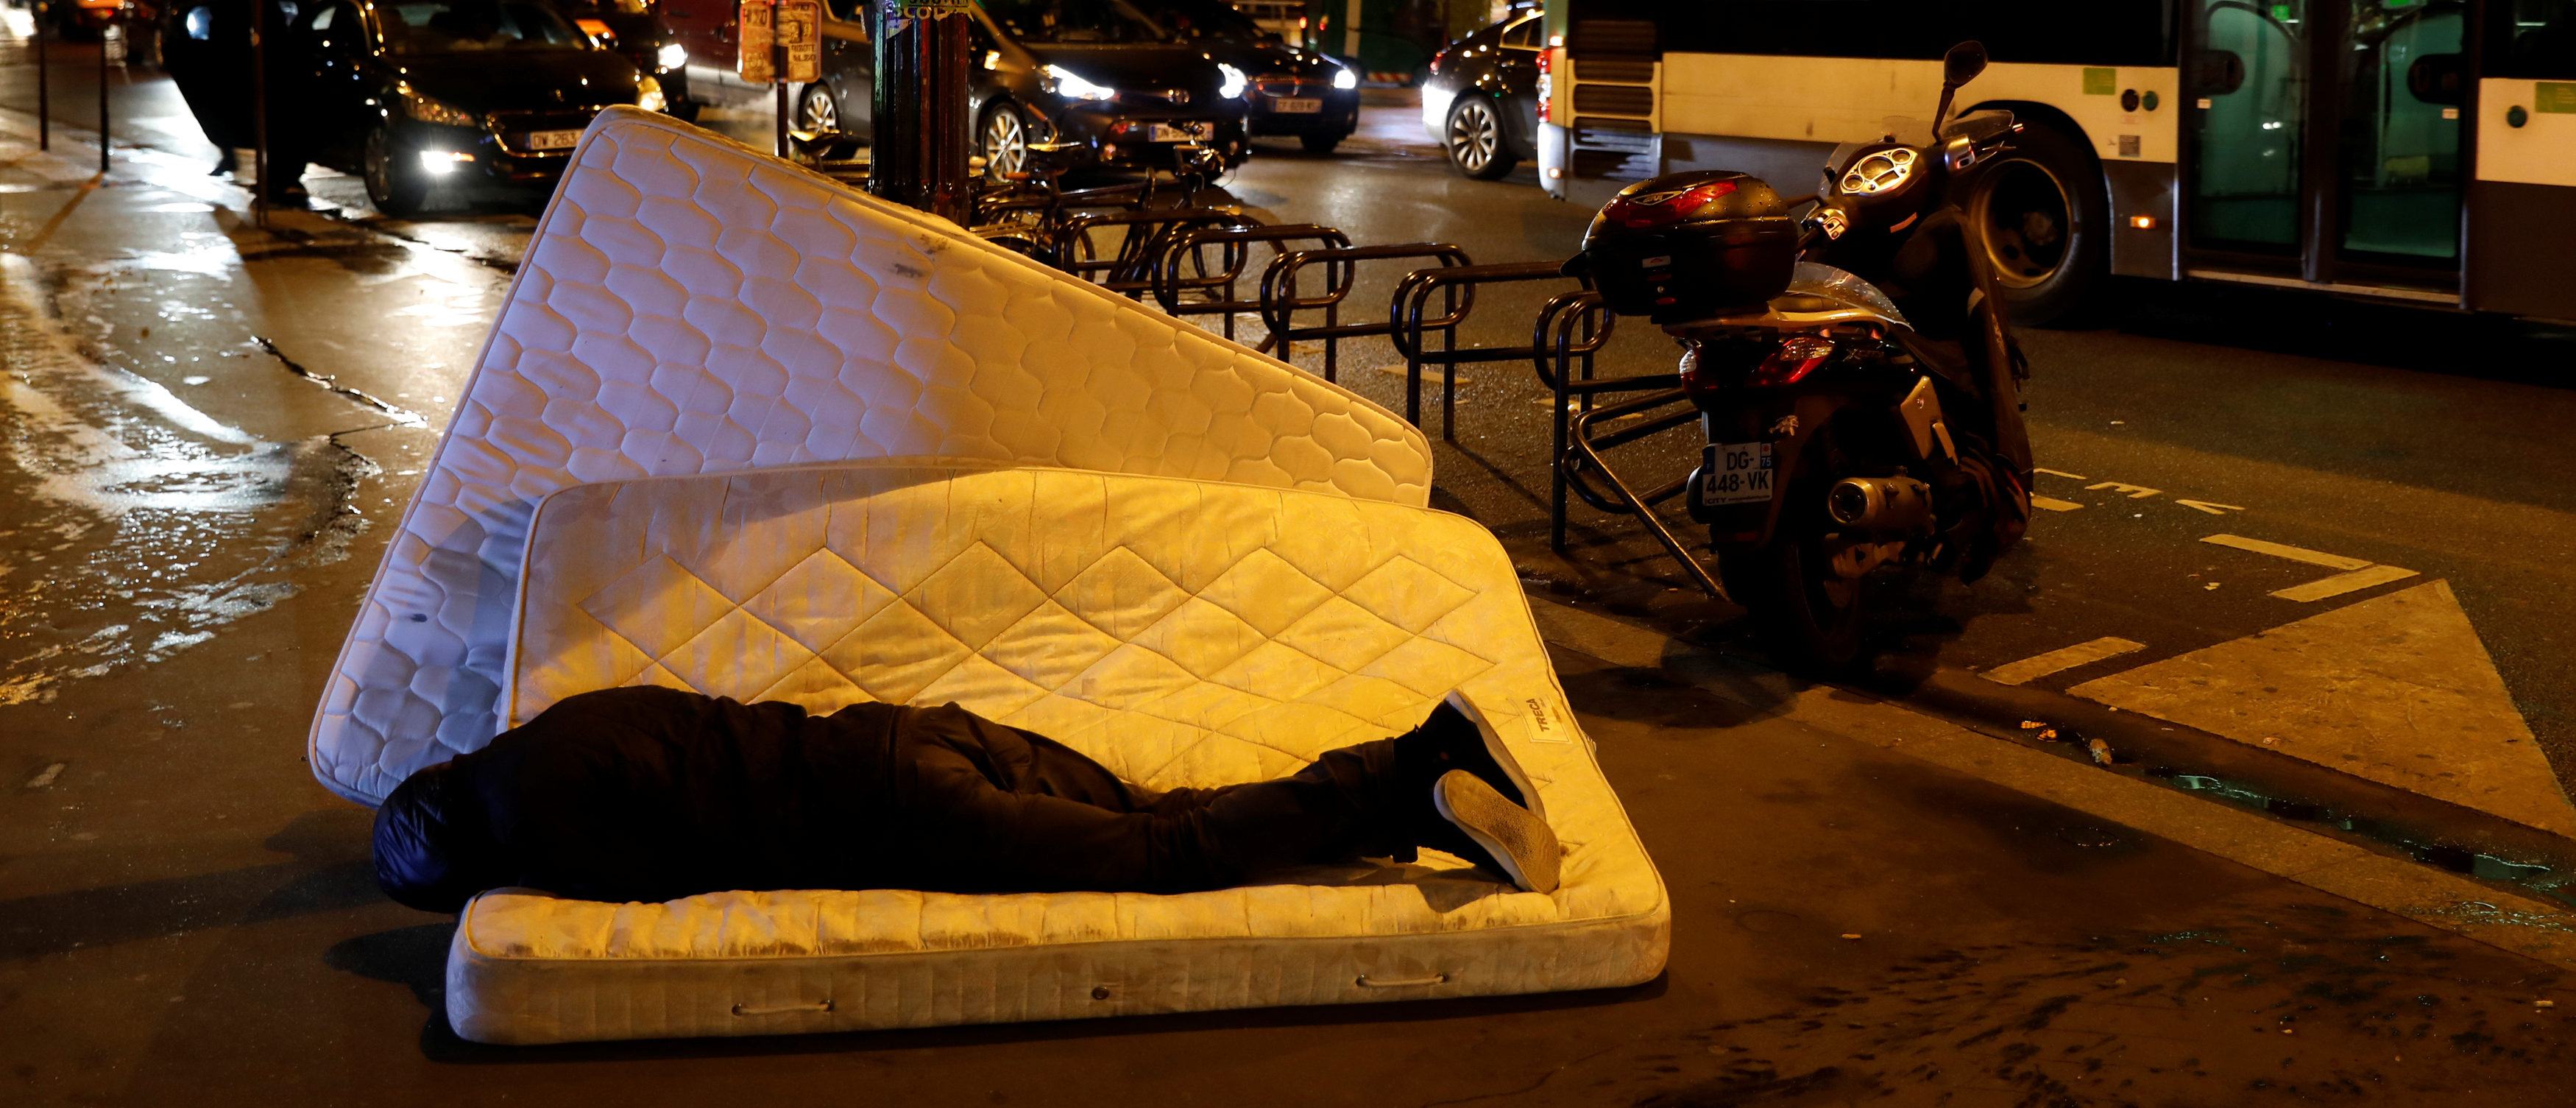 A man sleeps on a mattress next to the SCMR (Drug supervised injection site), the first supervised injection room for drug users, in Paris, October 17, 2016. REUTERS/Benoit Tessier